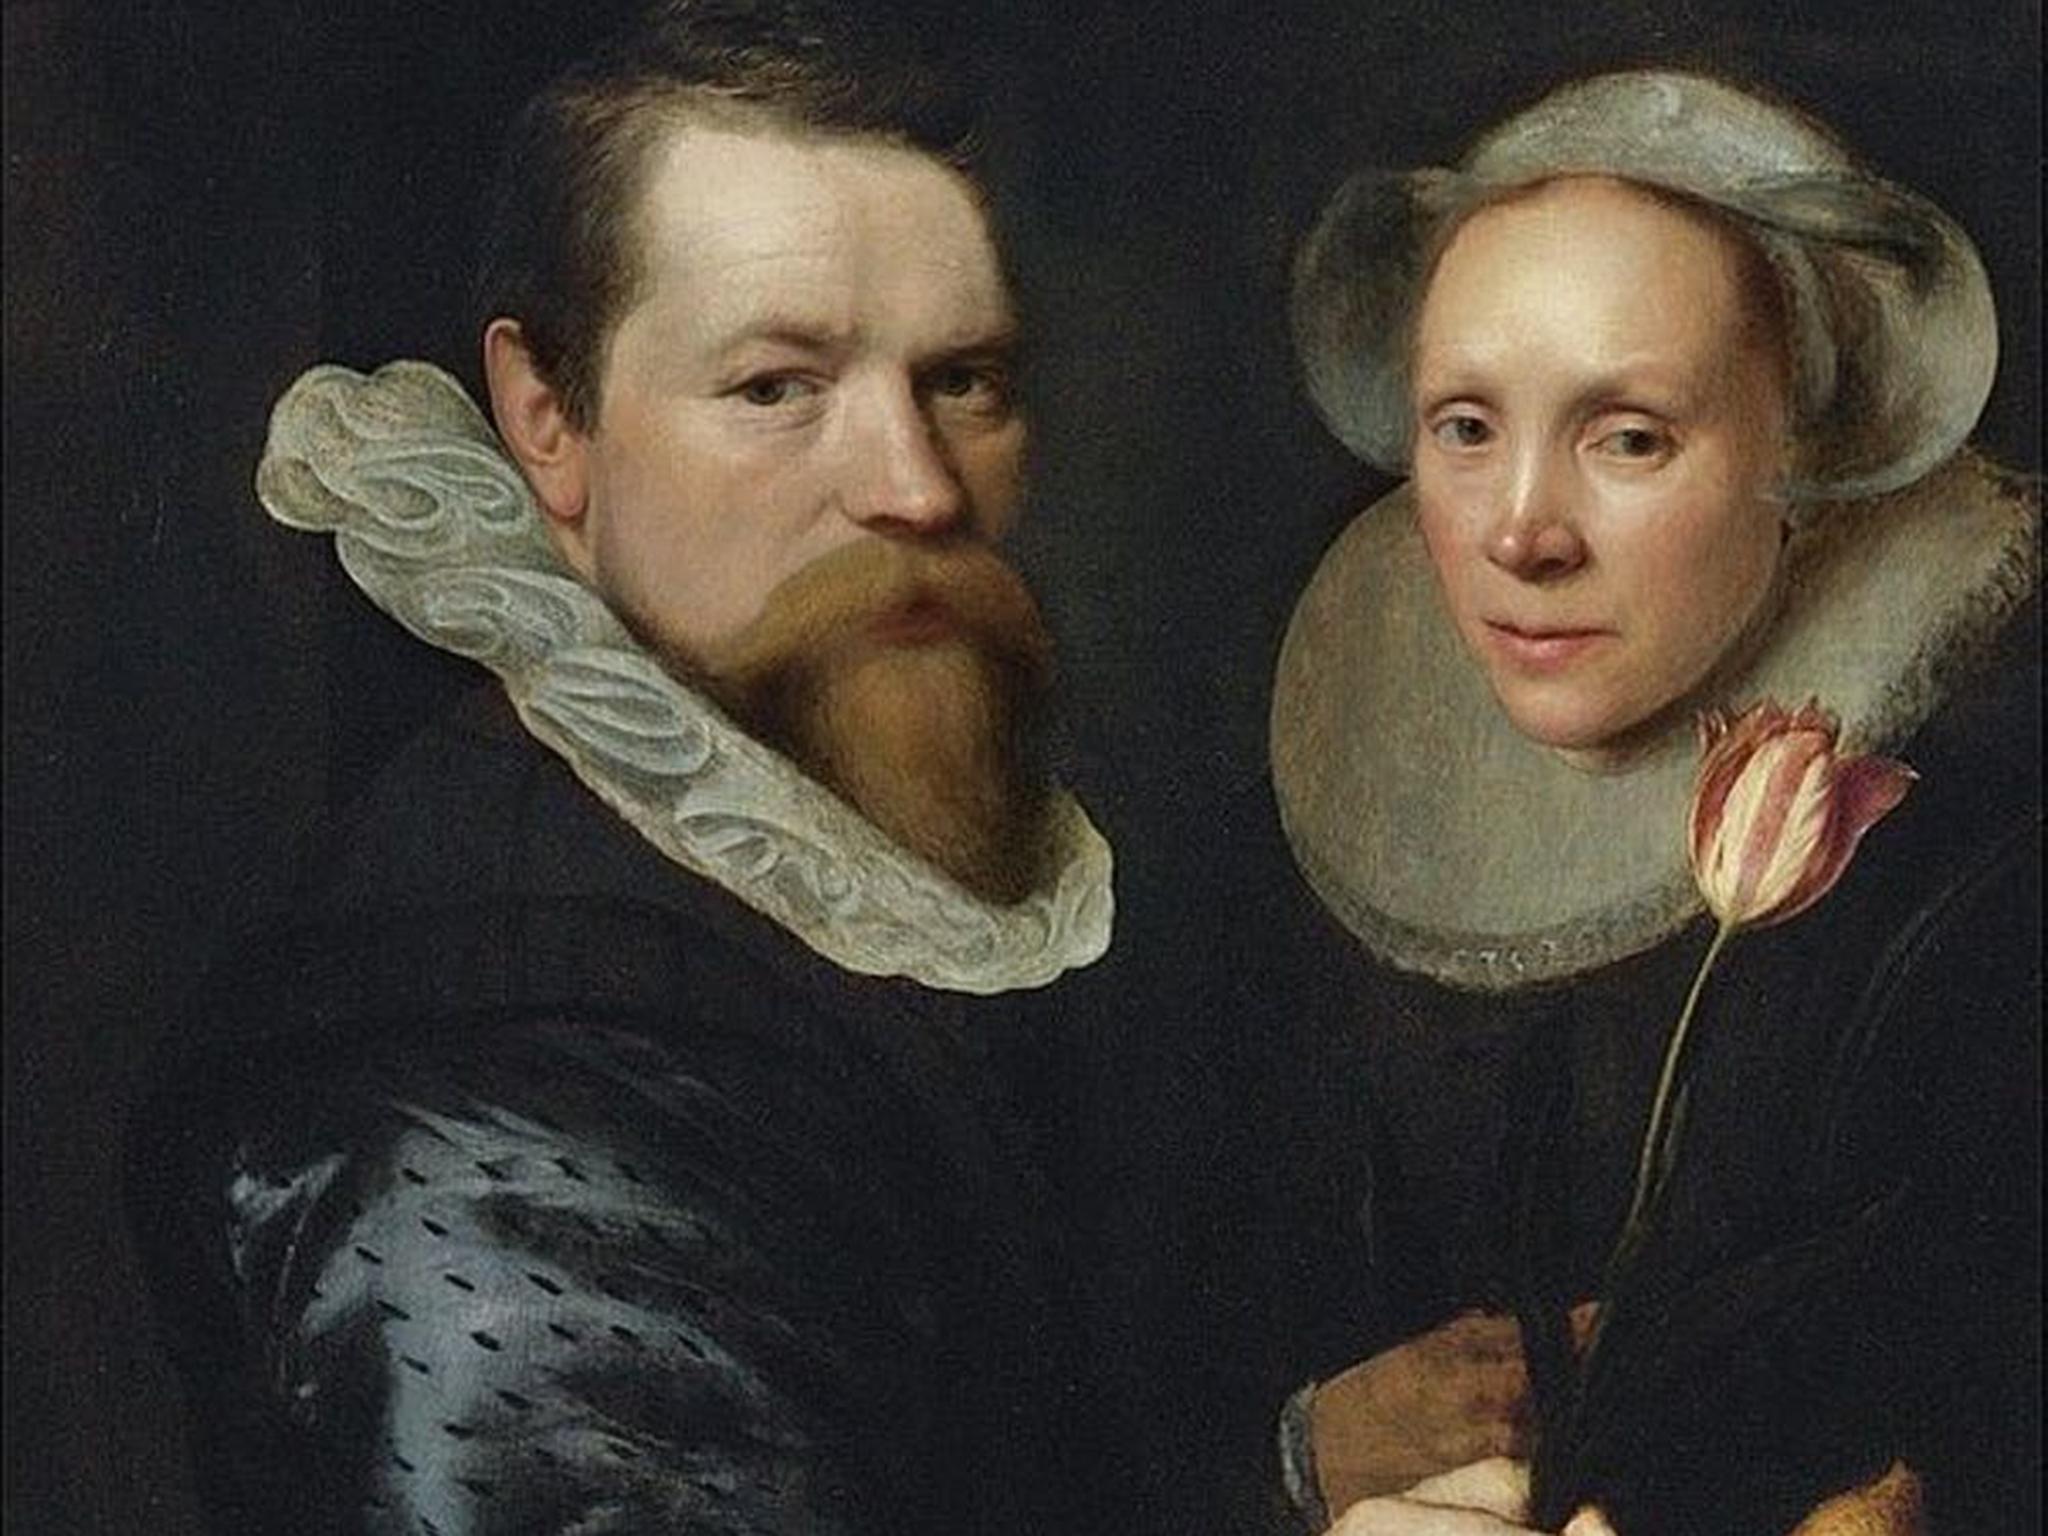 A sign of good taste? Michiel Jansz van Mierevelt, ‘Double Portrait of a Husband and Wife with Tulip, Bulb, and Shells’, 1606